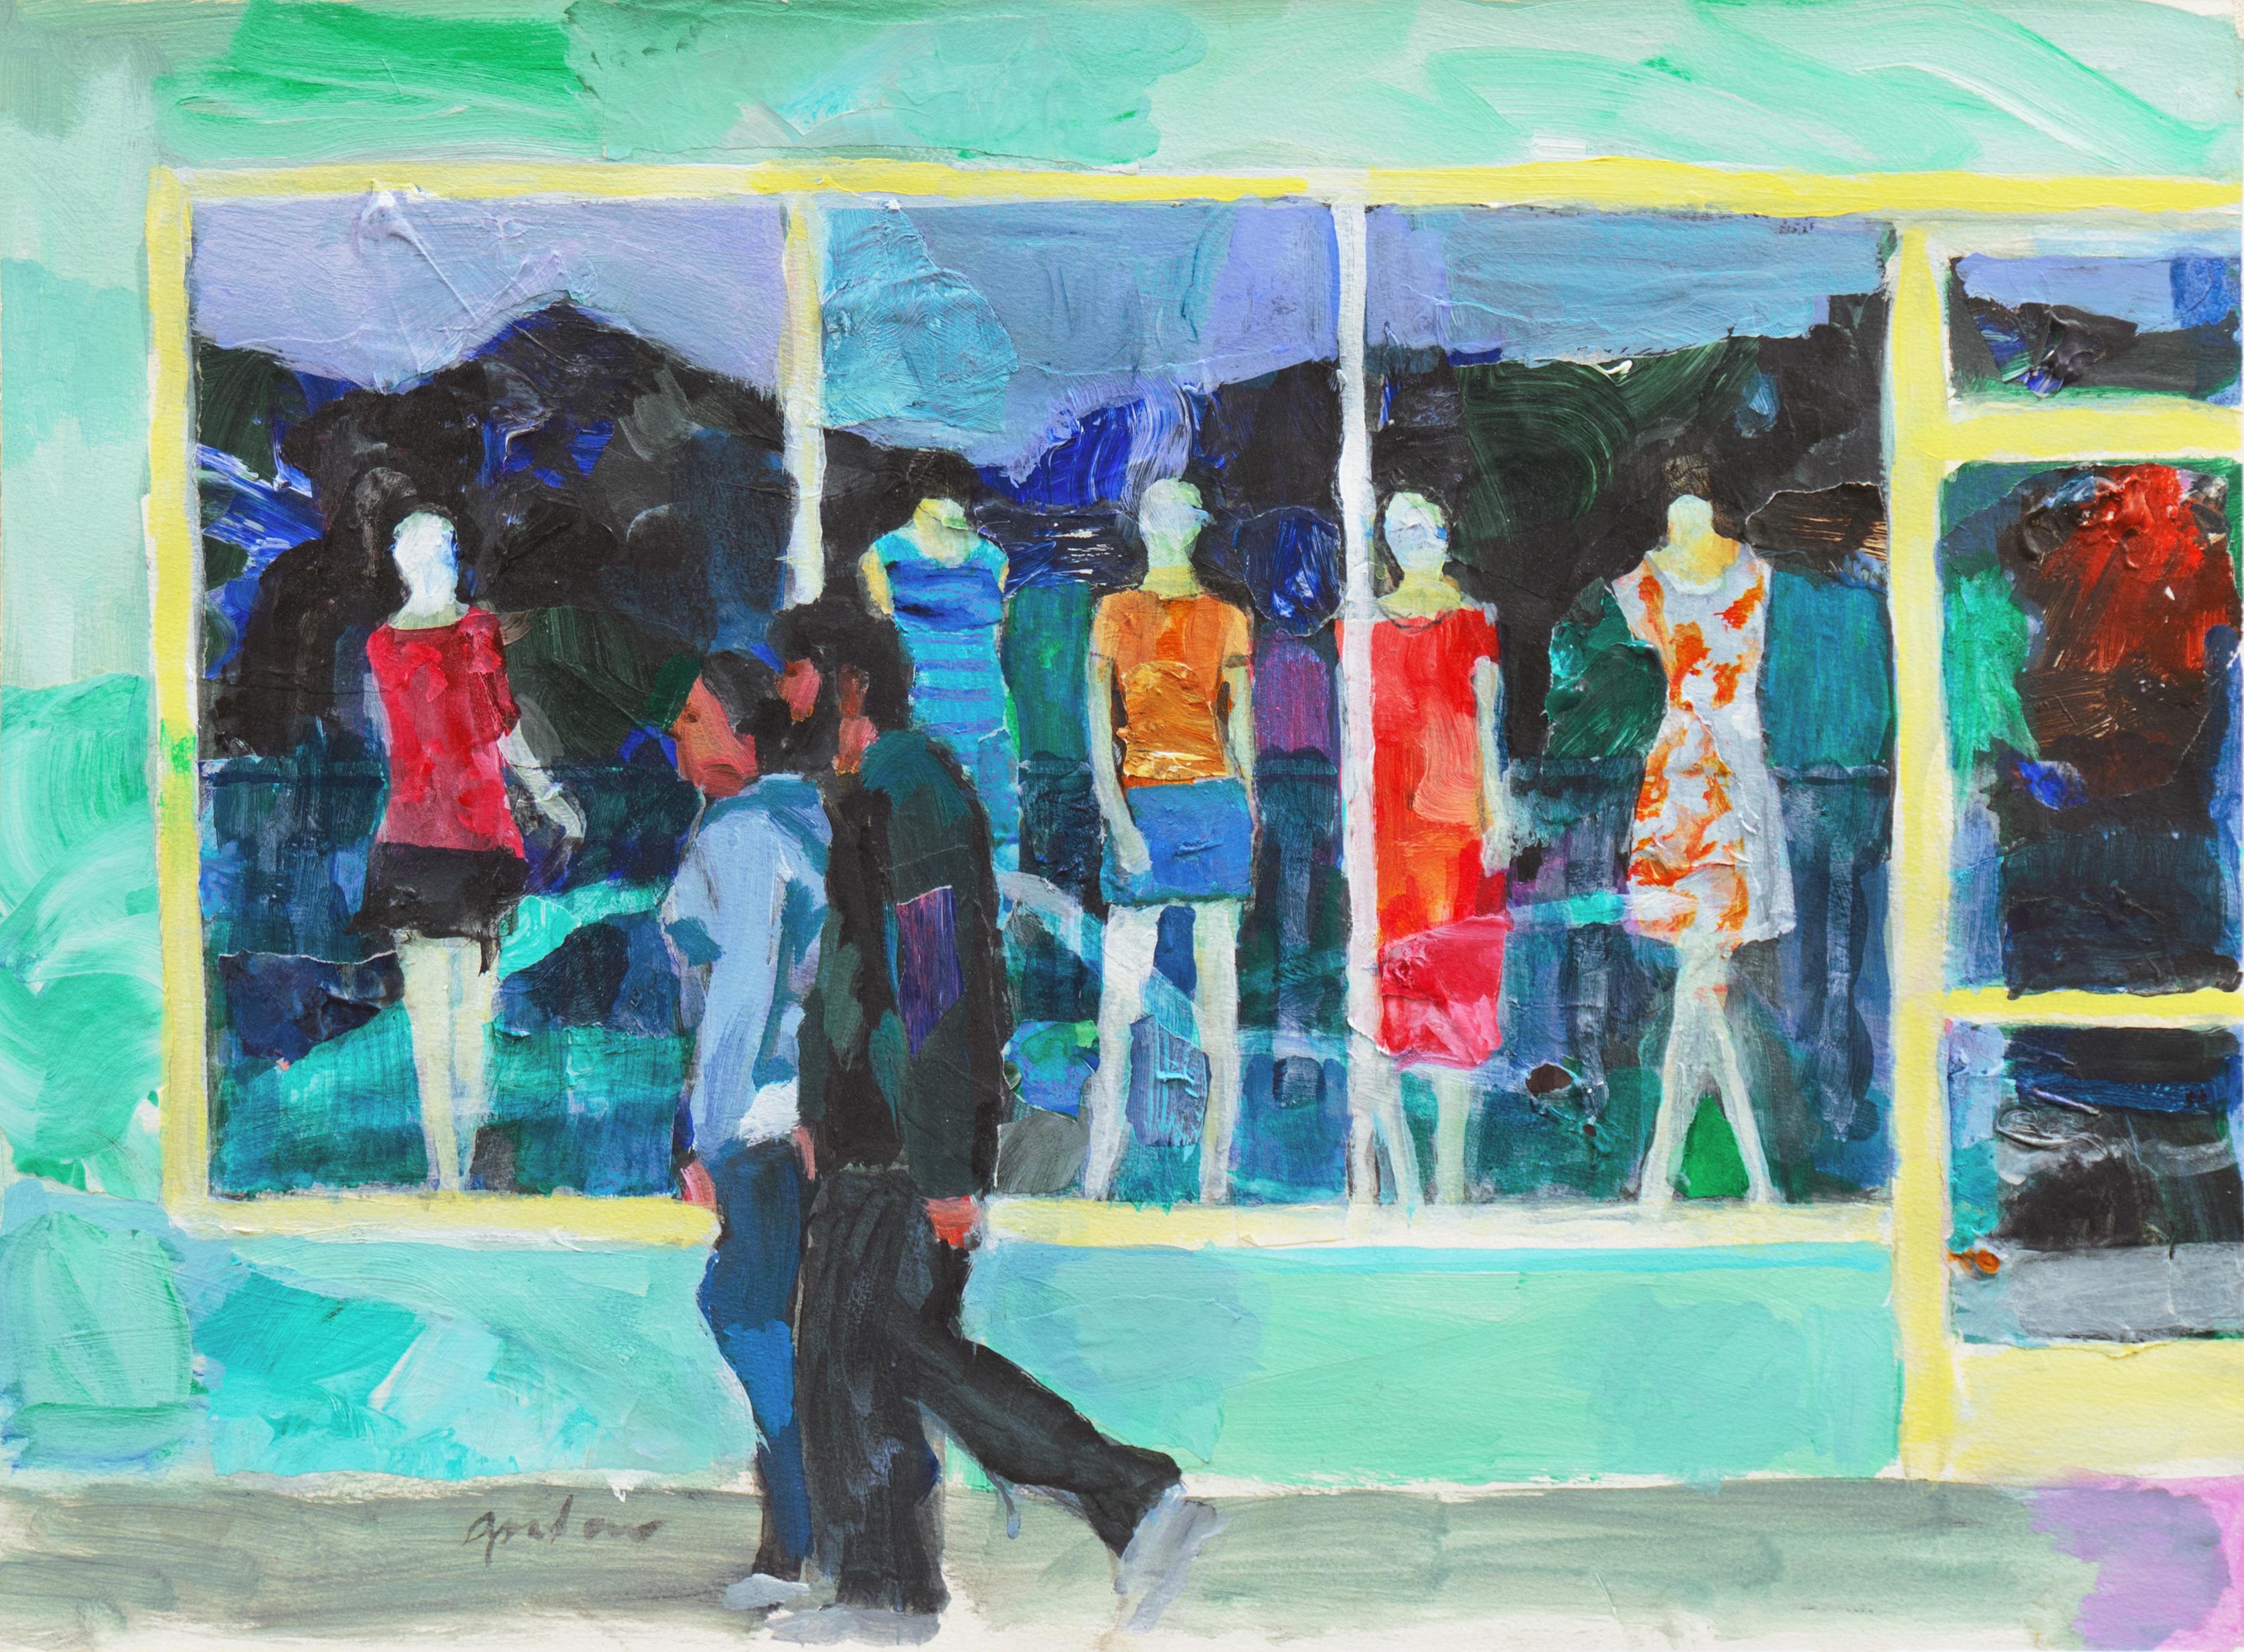 'Mannequins in a Store Window', Bay Area Figurative, Student of Wayne Thiebaud